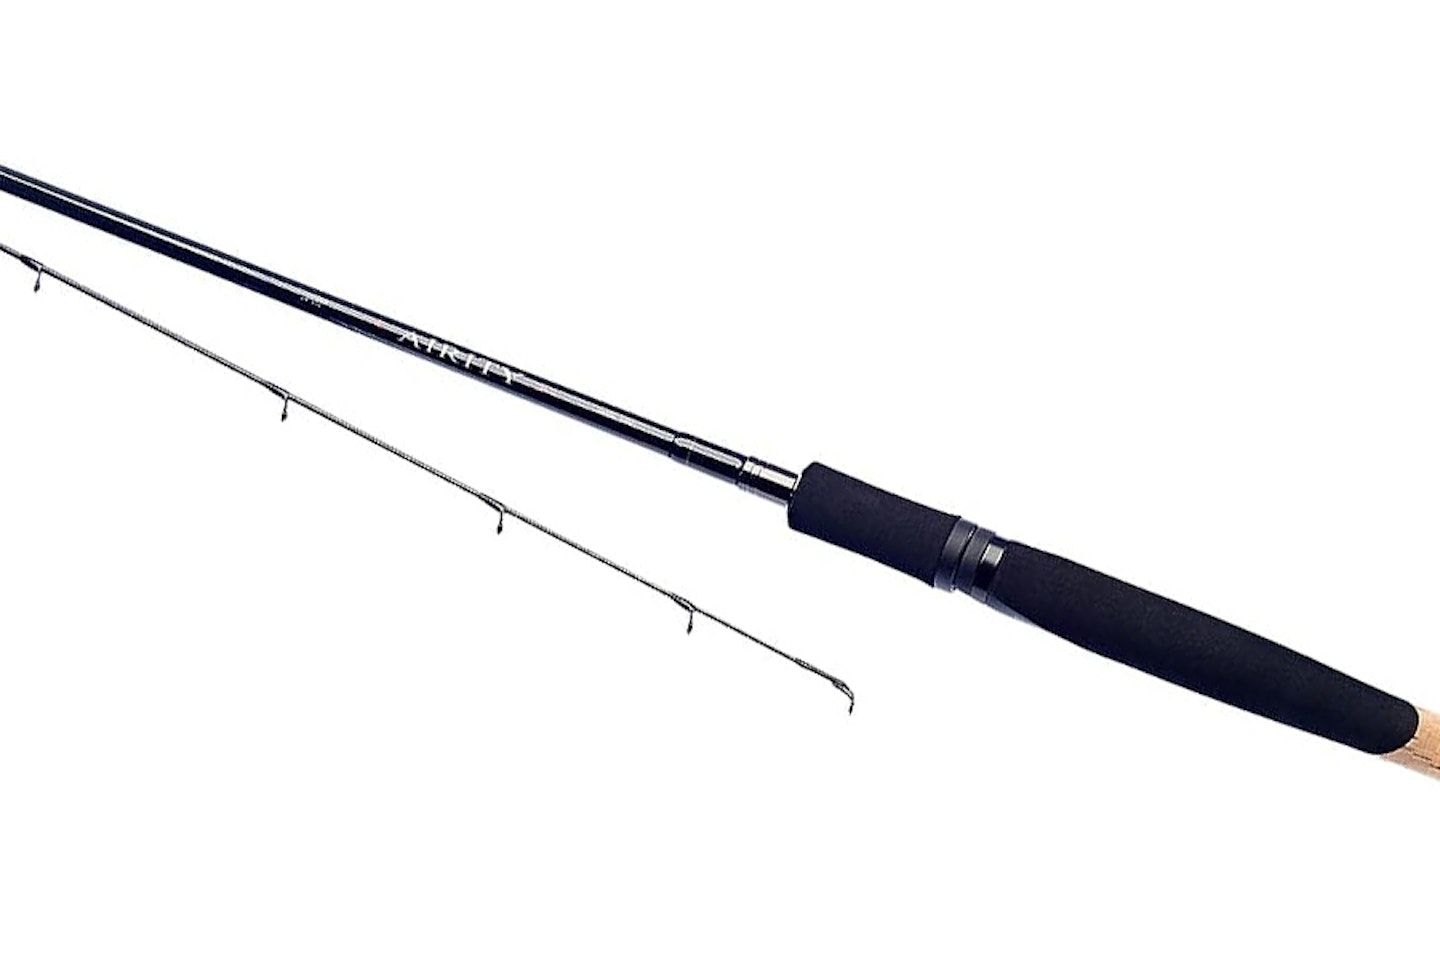 The best pellet waggler rods for all budgets